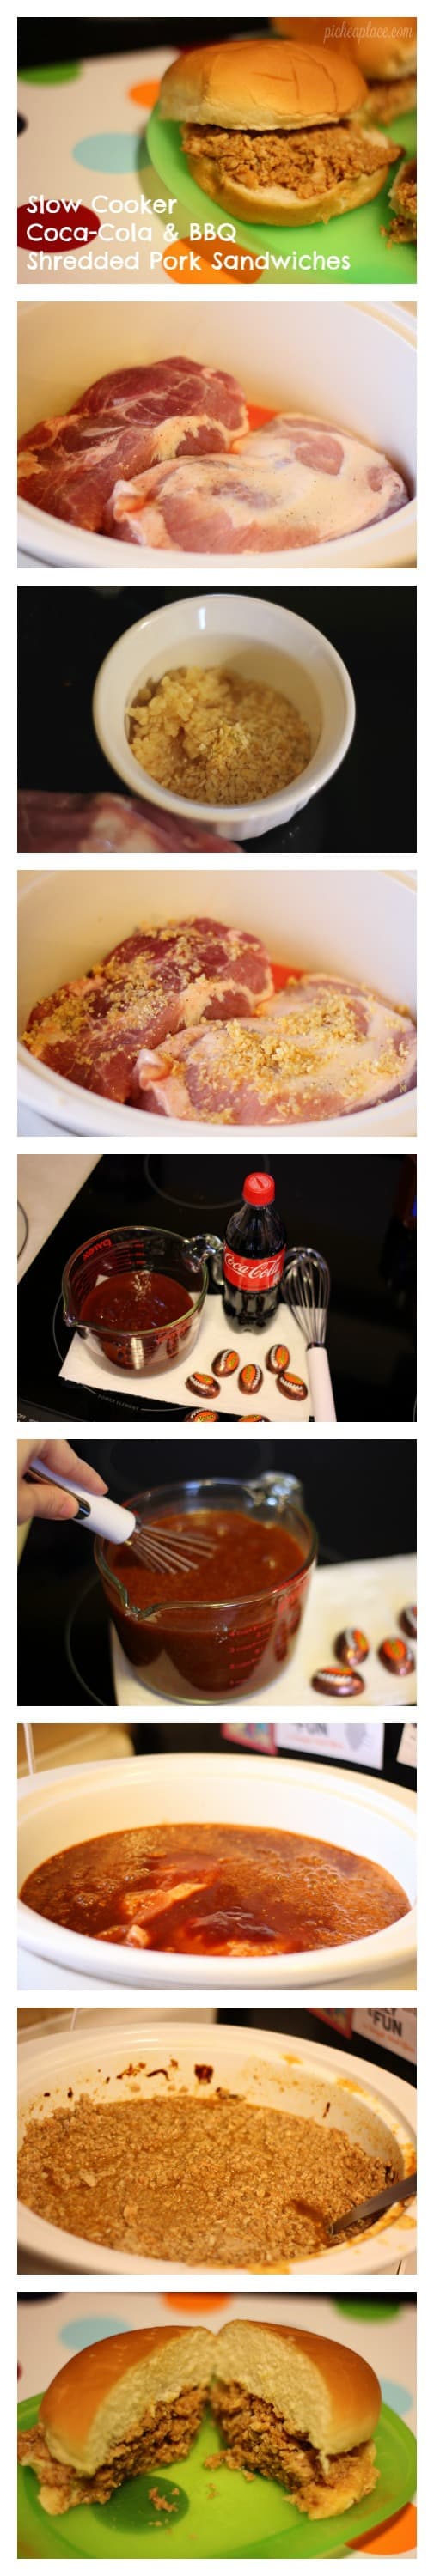 Slow Cooker Coca-Cola & BBQ Shredded Pork Sandwiches | the perfect potluck recipe to bring along when you watch the big game with family and friends